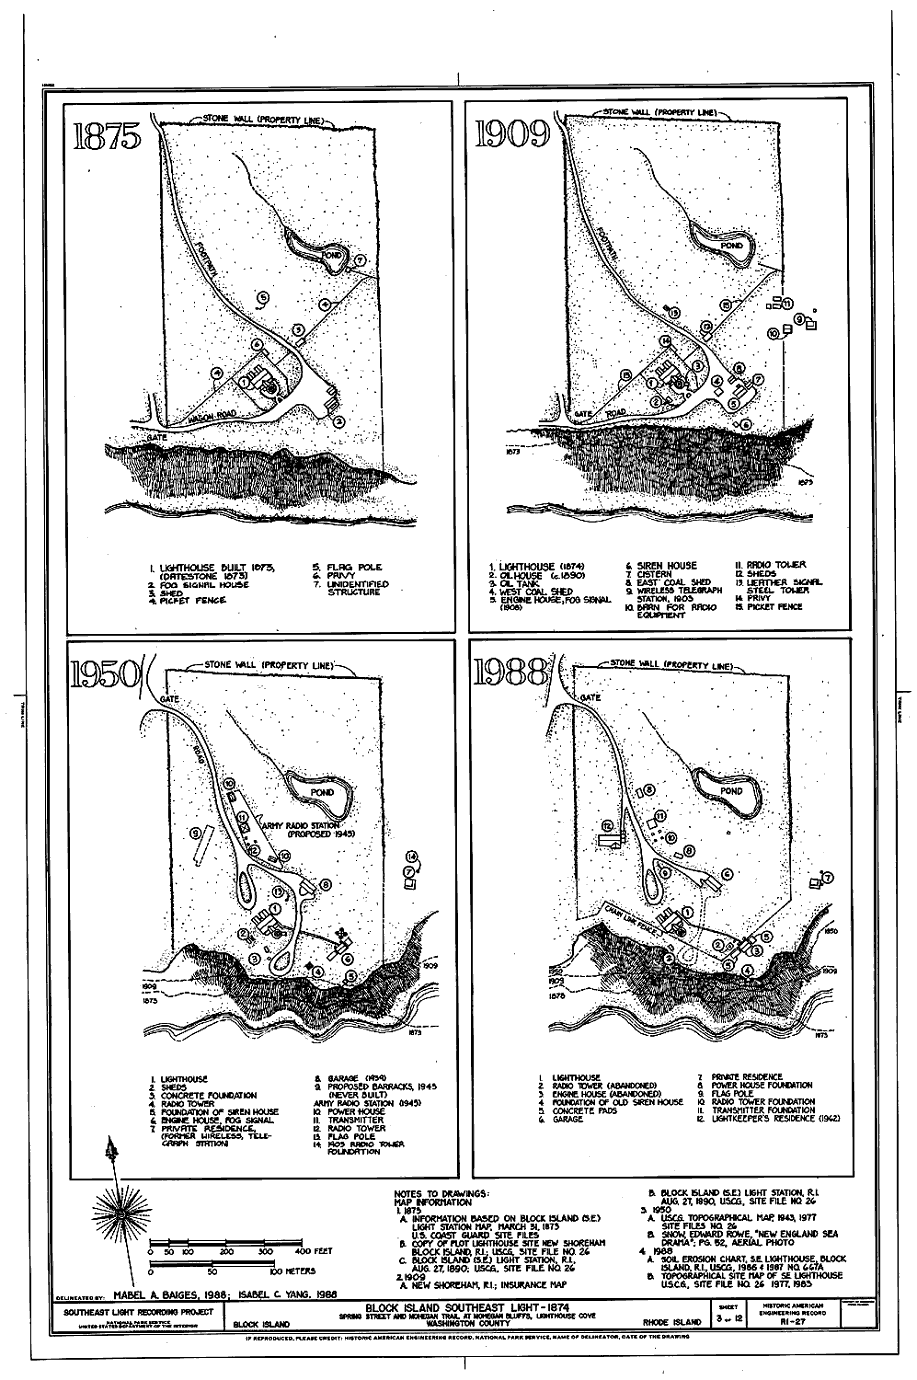 Maps of Block Island Southeast Lighthouse Station - 1875 to 1988